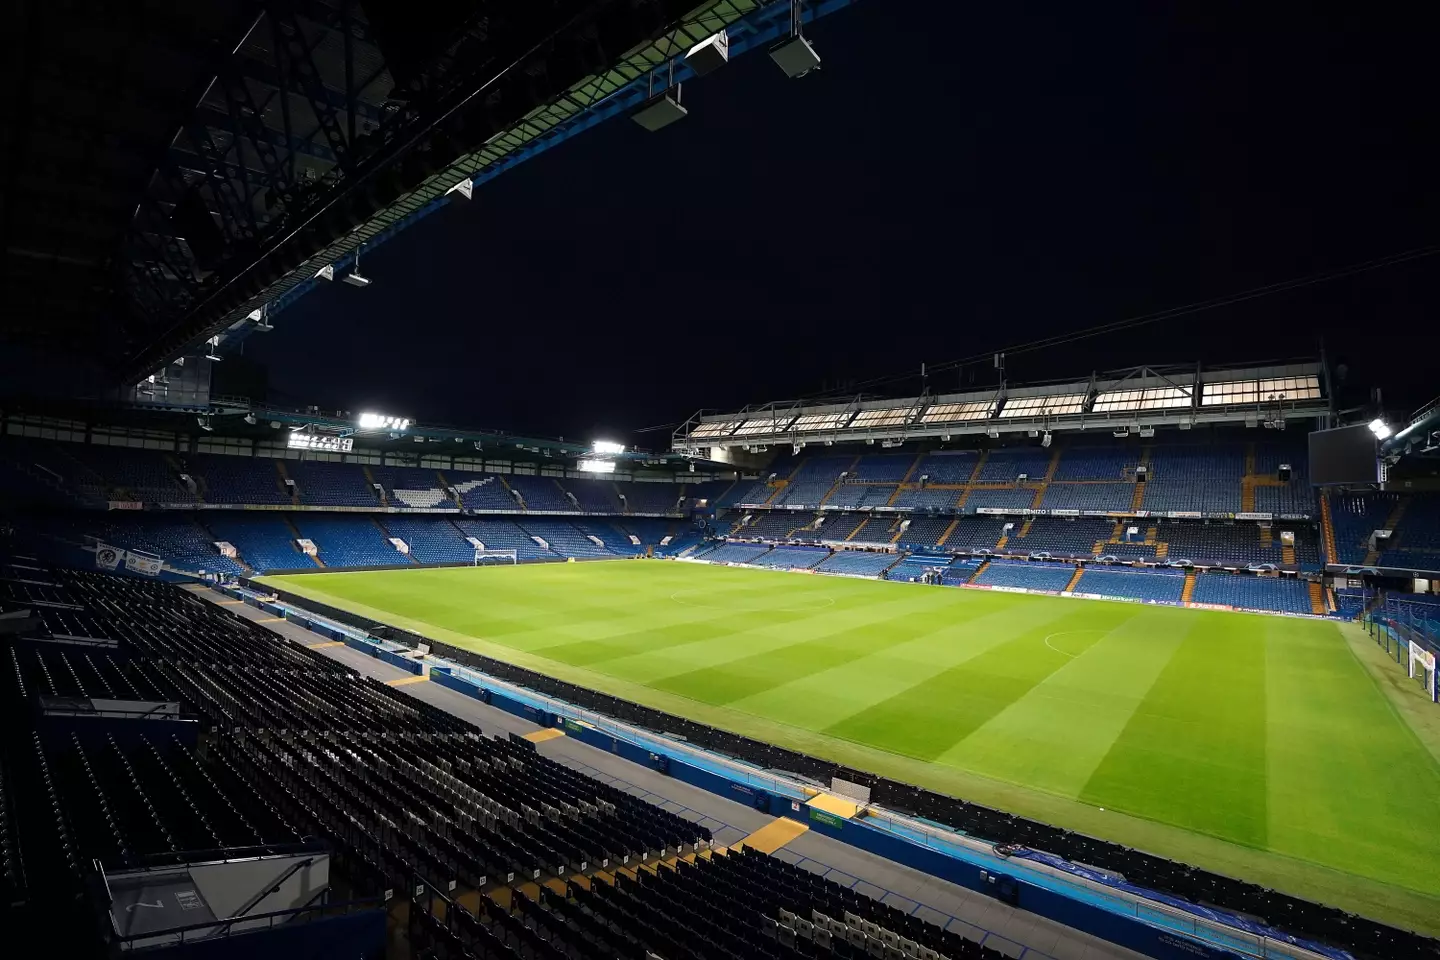 General view inside the ground at Stamford Bridge. (Alamy)